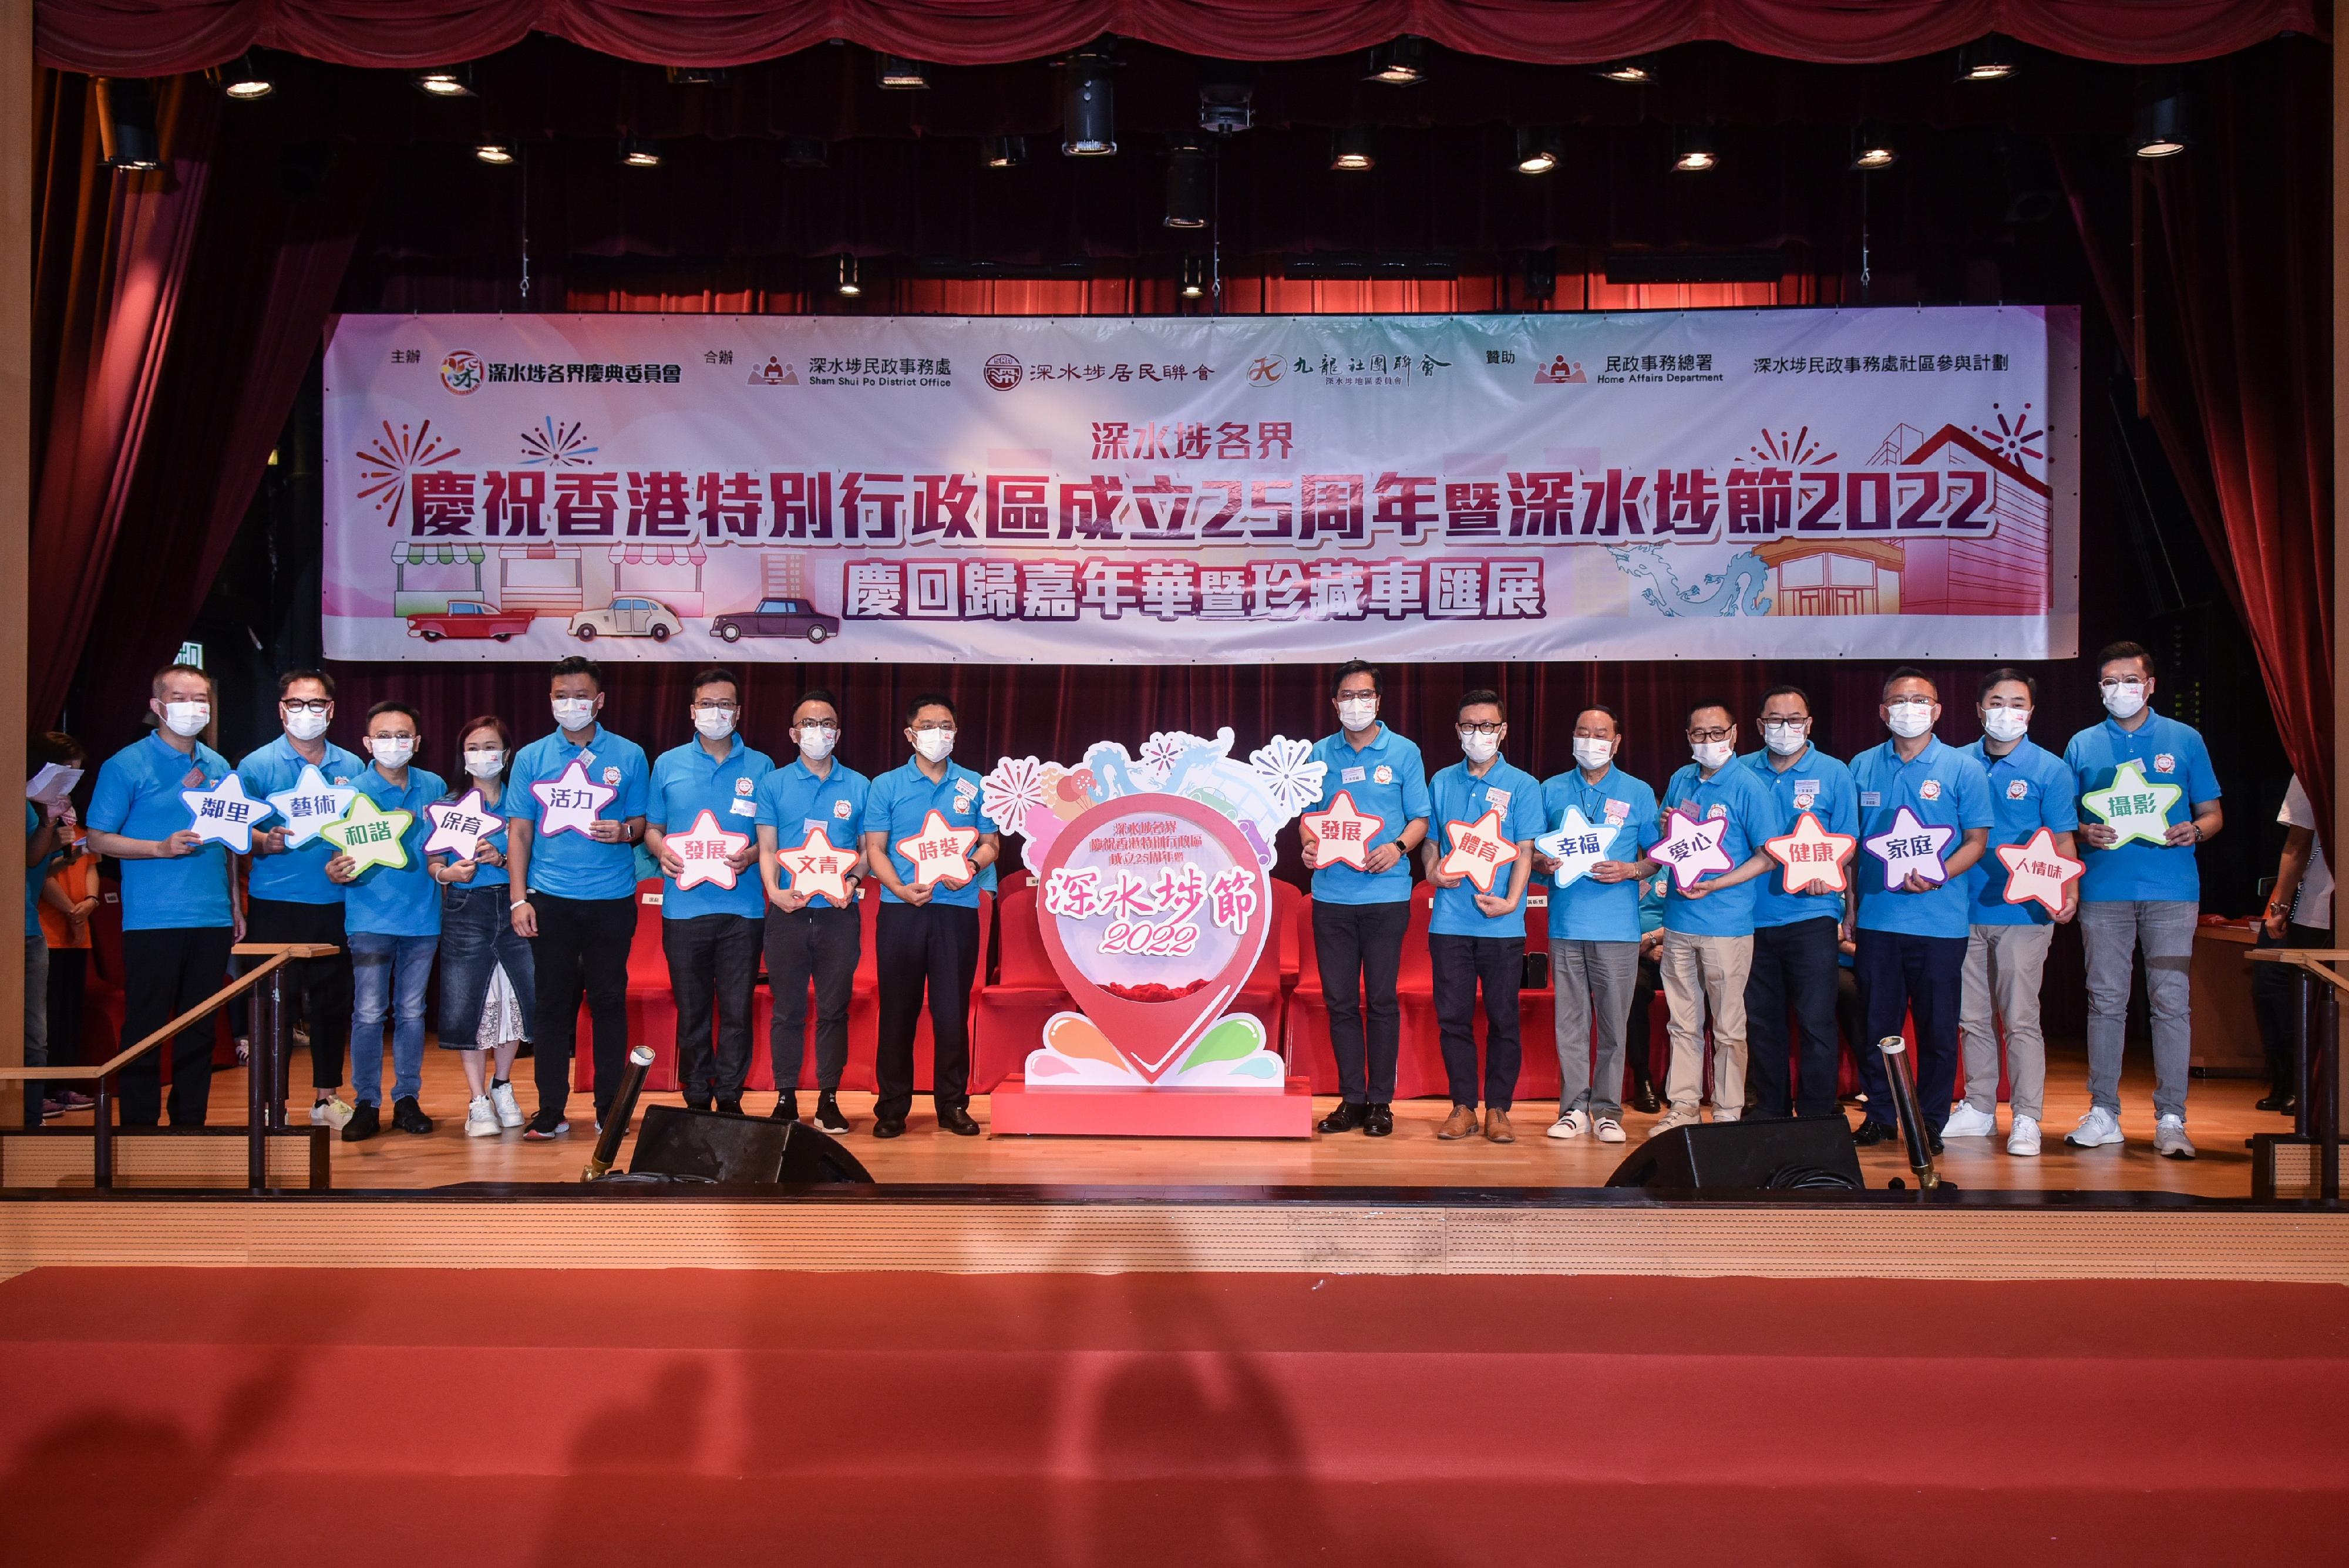 The Deputy Financial Secretary, Mr Michael Wong (eighth right), pictured with other guests at the kick-off ceremony of Sham Shui Po district in celebration of the 25th anniversary of the establishment of the HKSAR cum Sham Shui Po Festival 2022.
